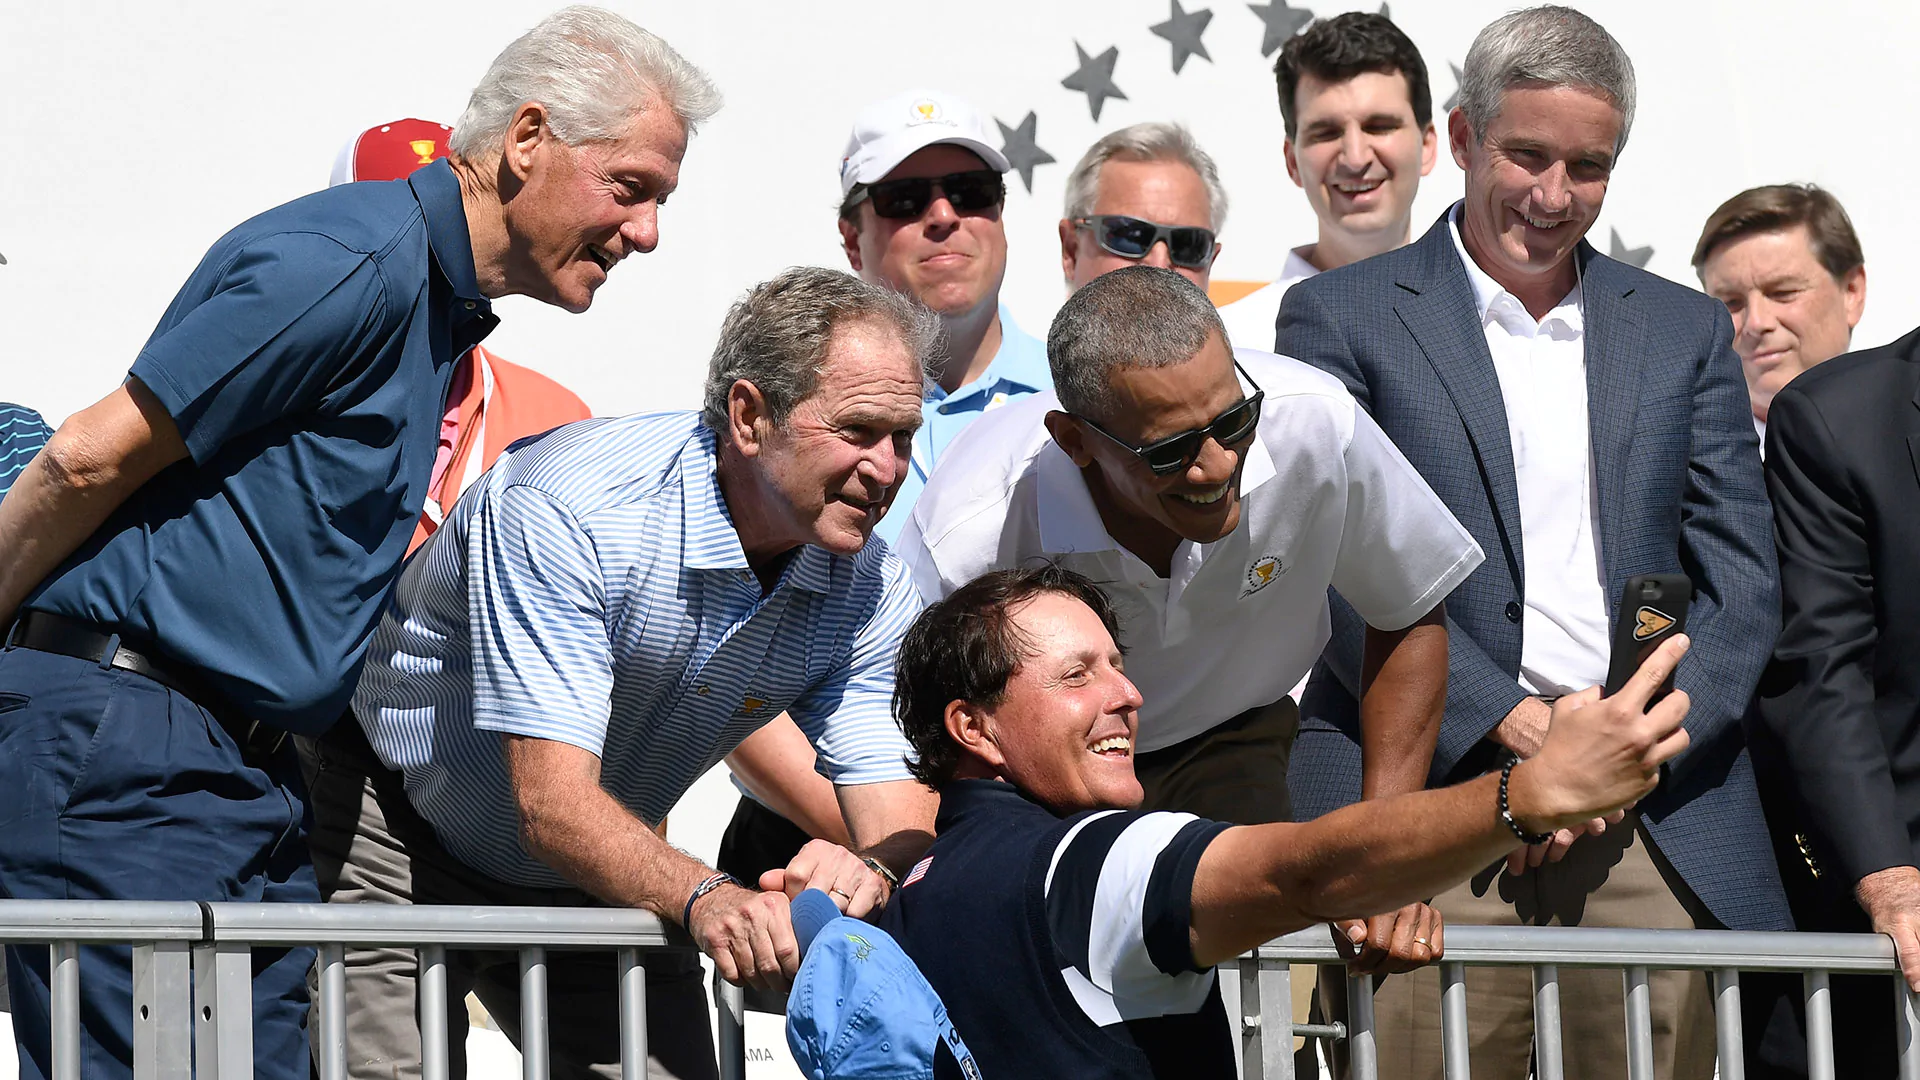 Phil takes selfie with Obama, Clinton and Bush 4